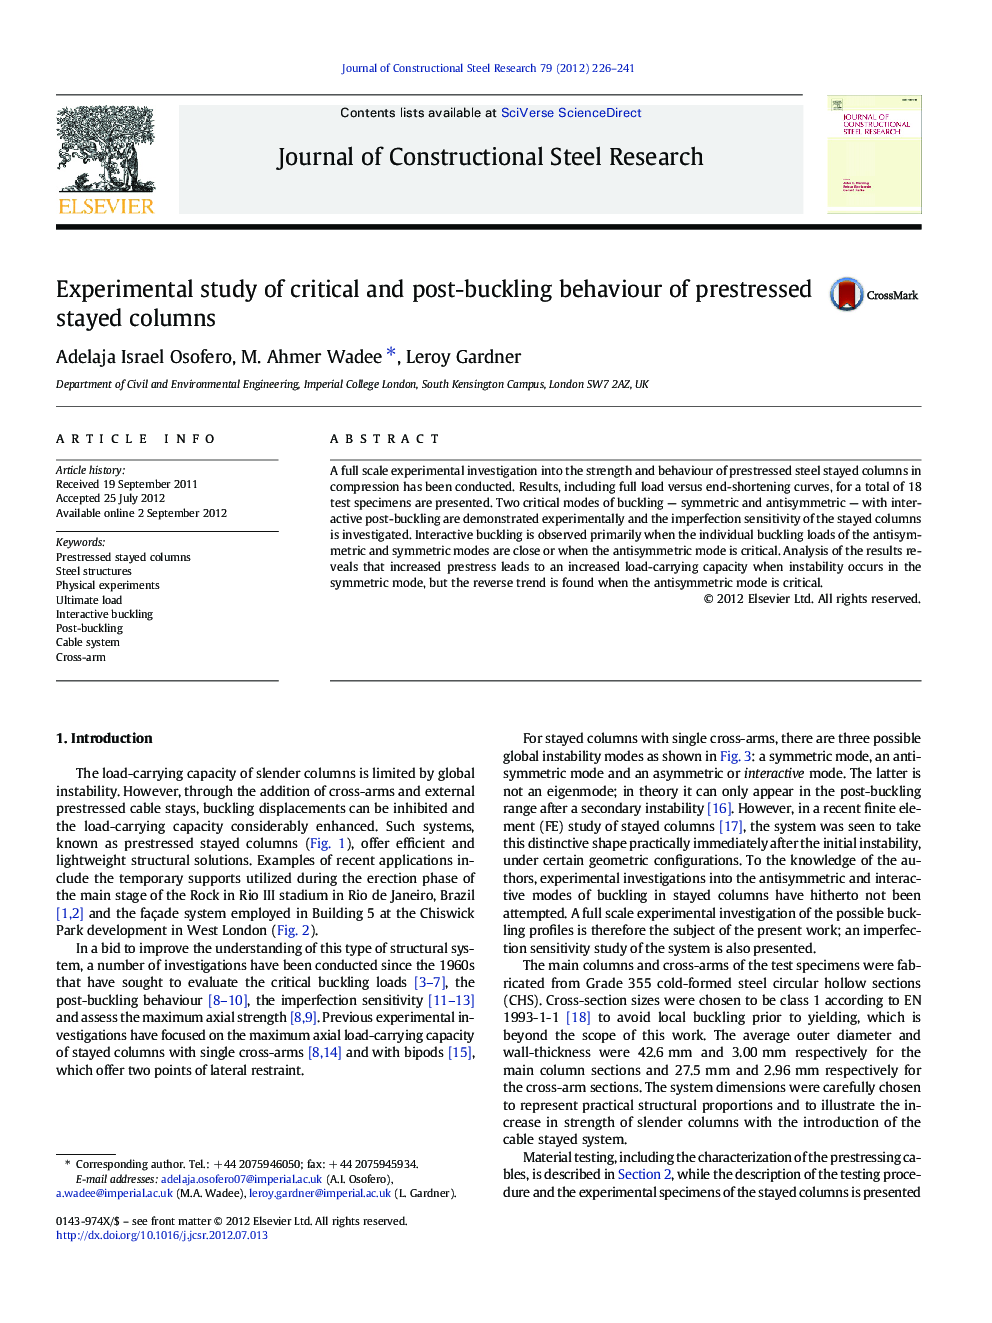 Experimental study of critical and post-buckling behaviour of prestressed stayed columns